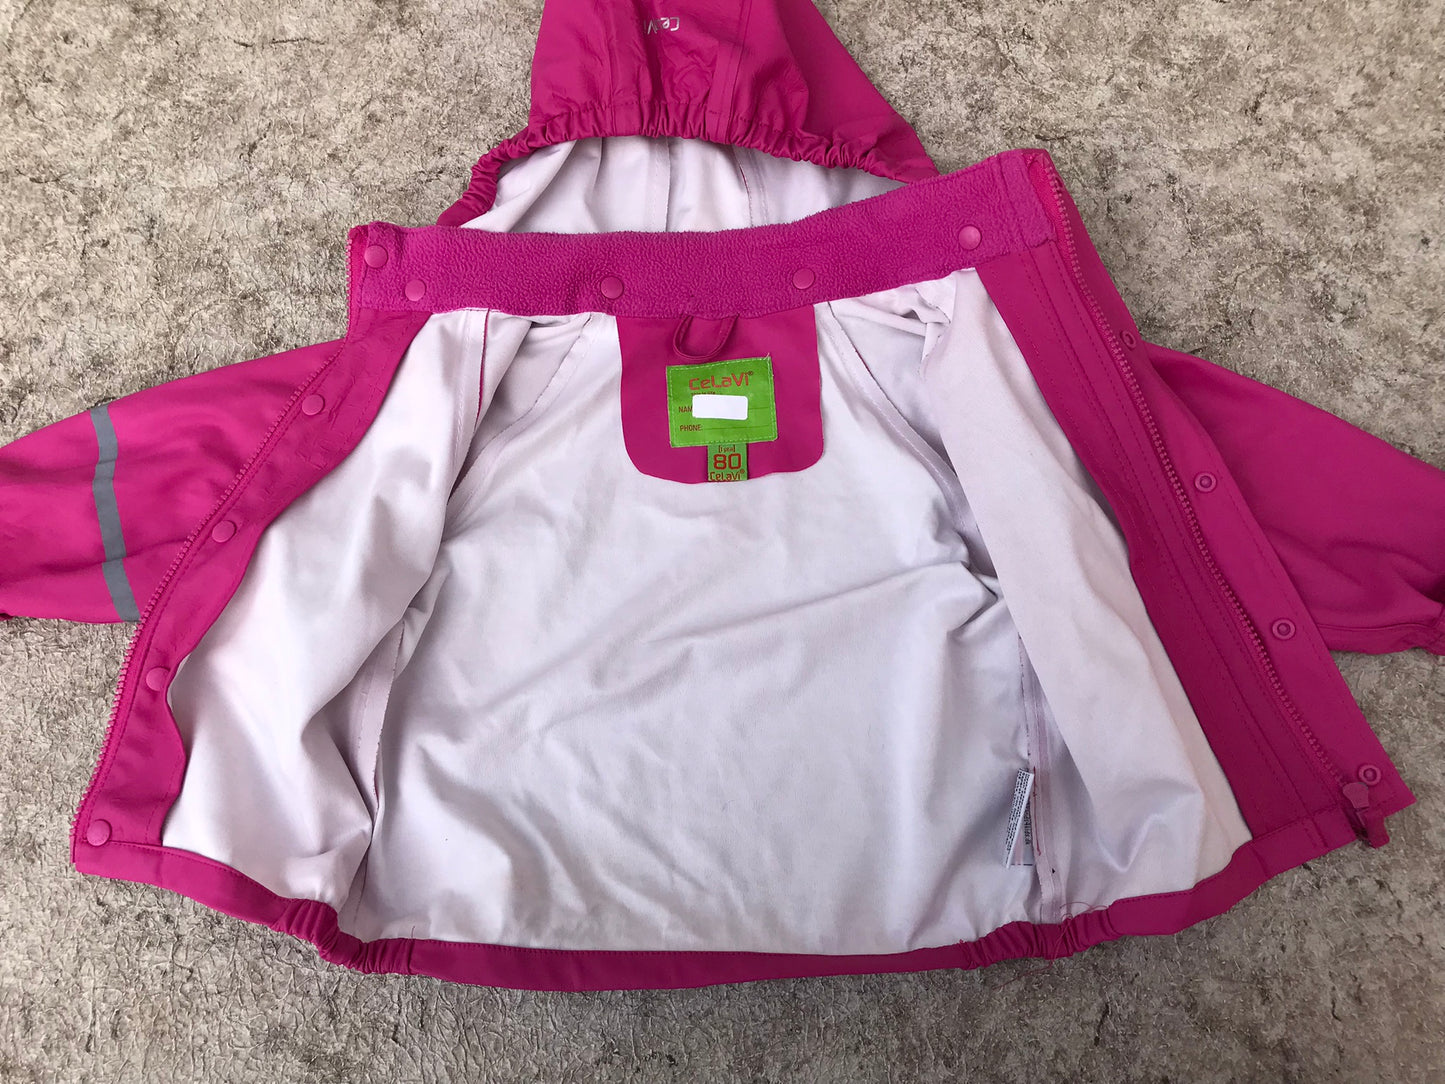 Rain Coat Child Size 12-18 Month From Europe Fushia Pink Waterproof  Excellent